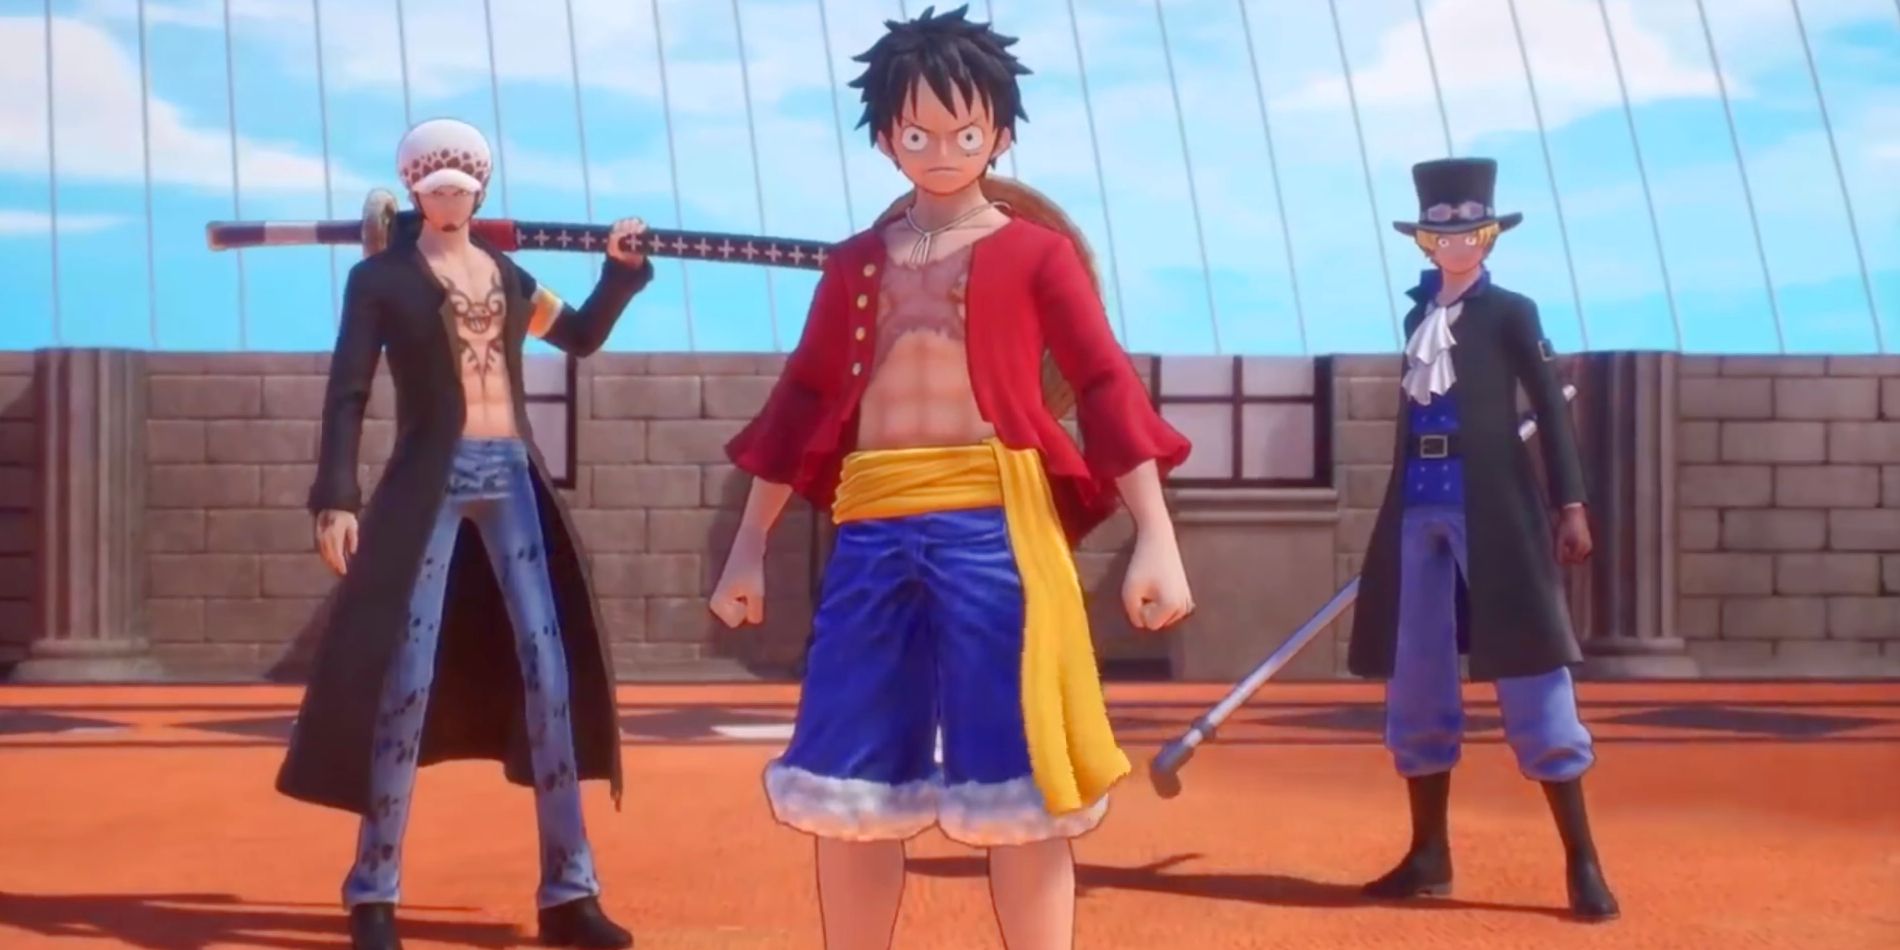 Luffy, Law, and Sabo are seen standing next to each other to challenge Doflamingo while the deadly birdcage wires close in on their location.